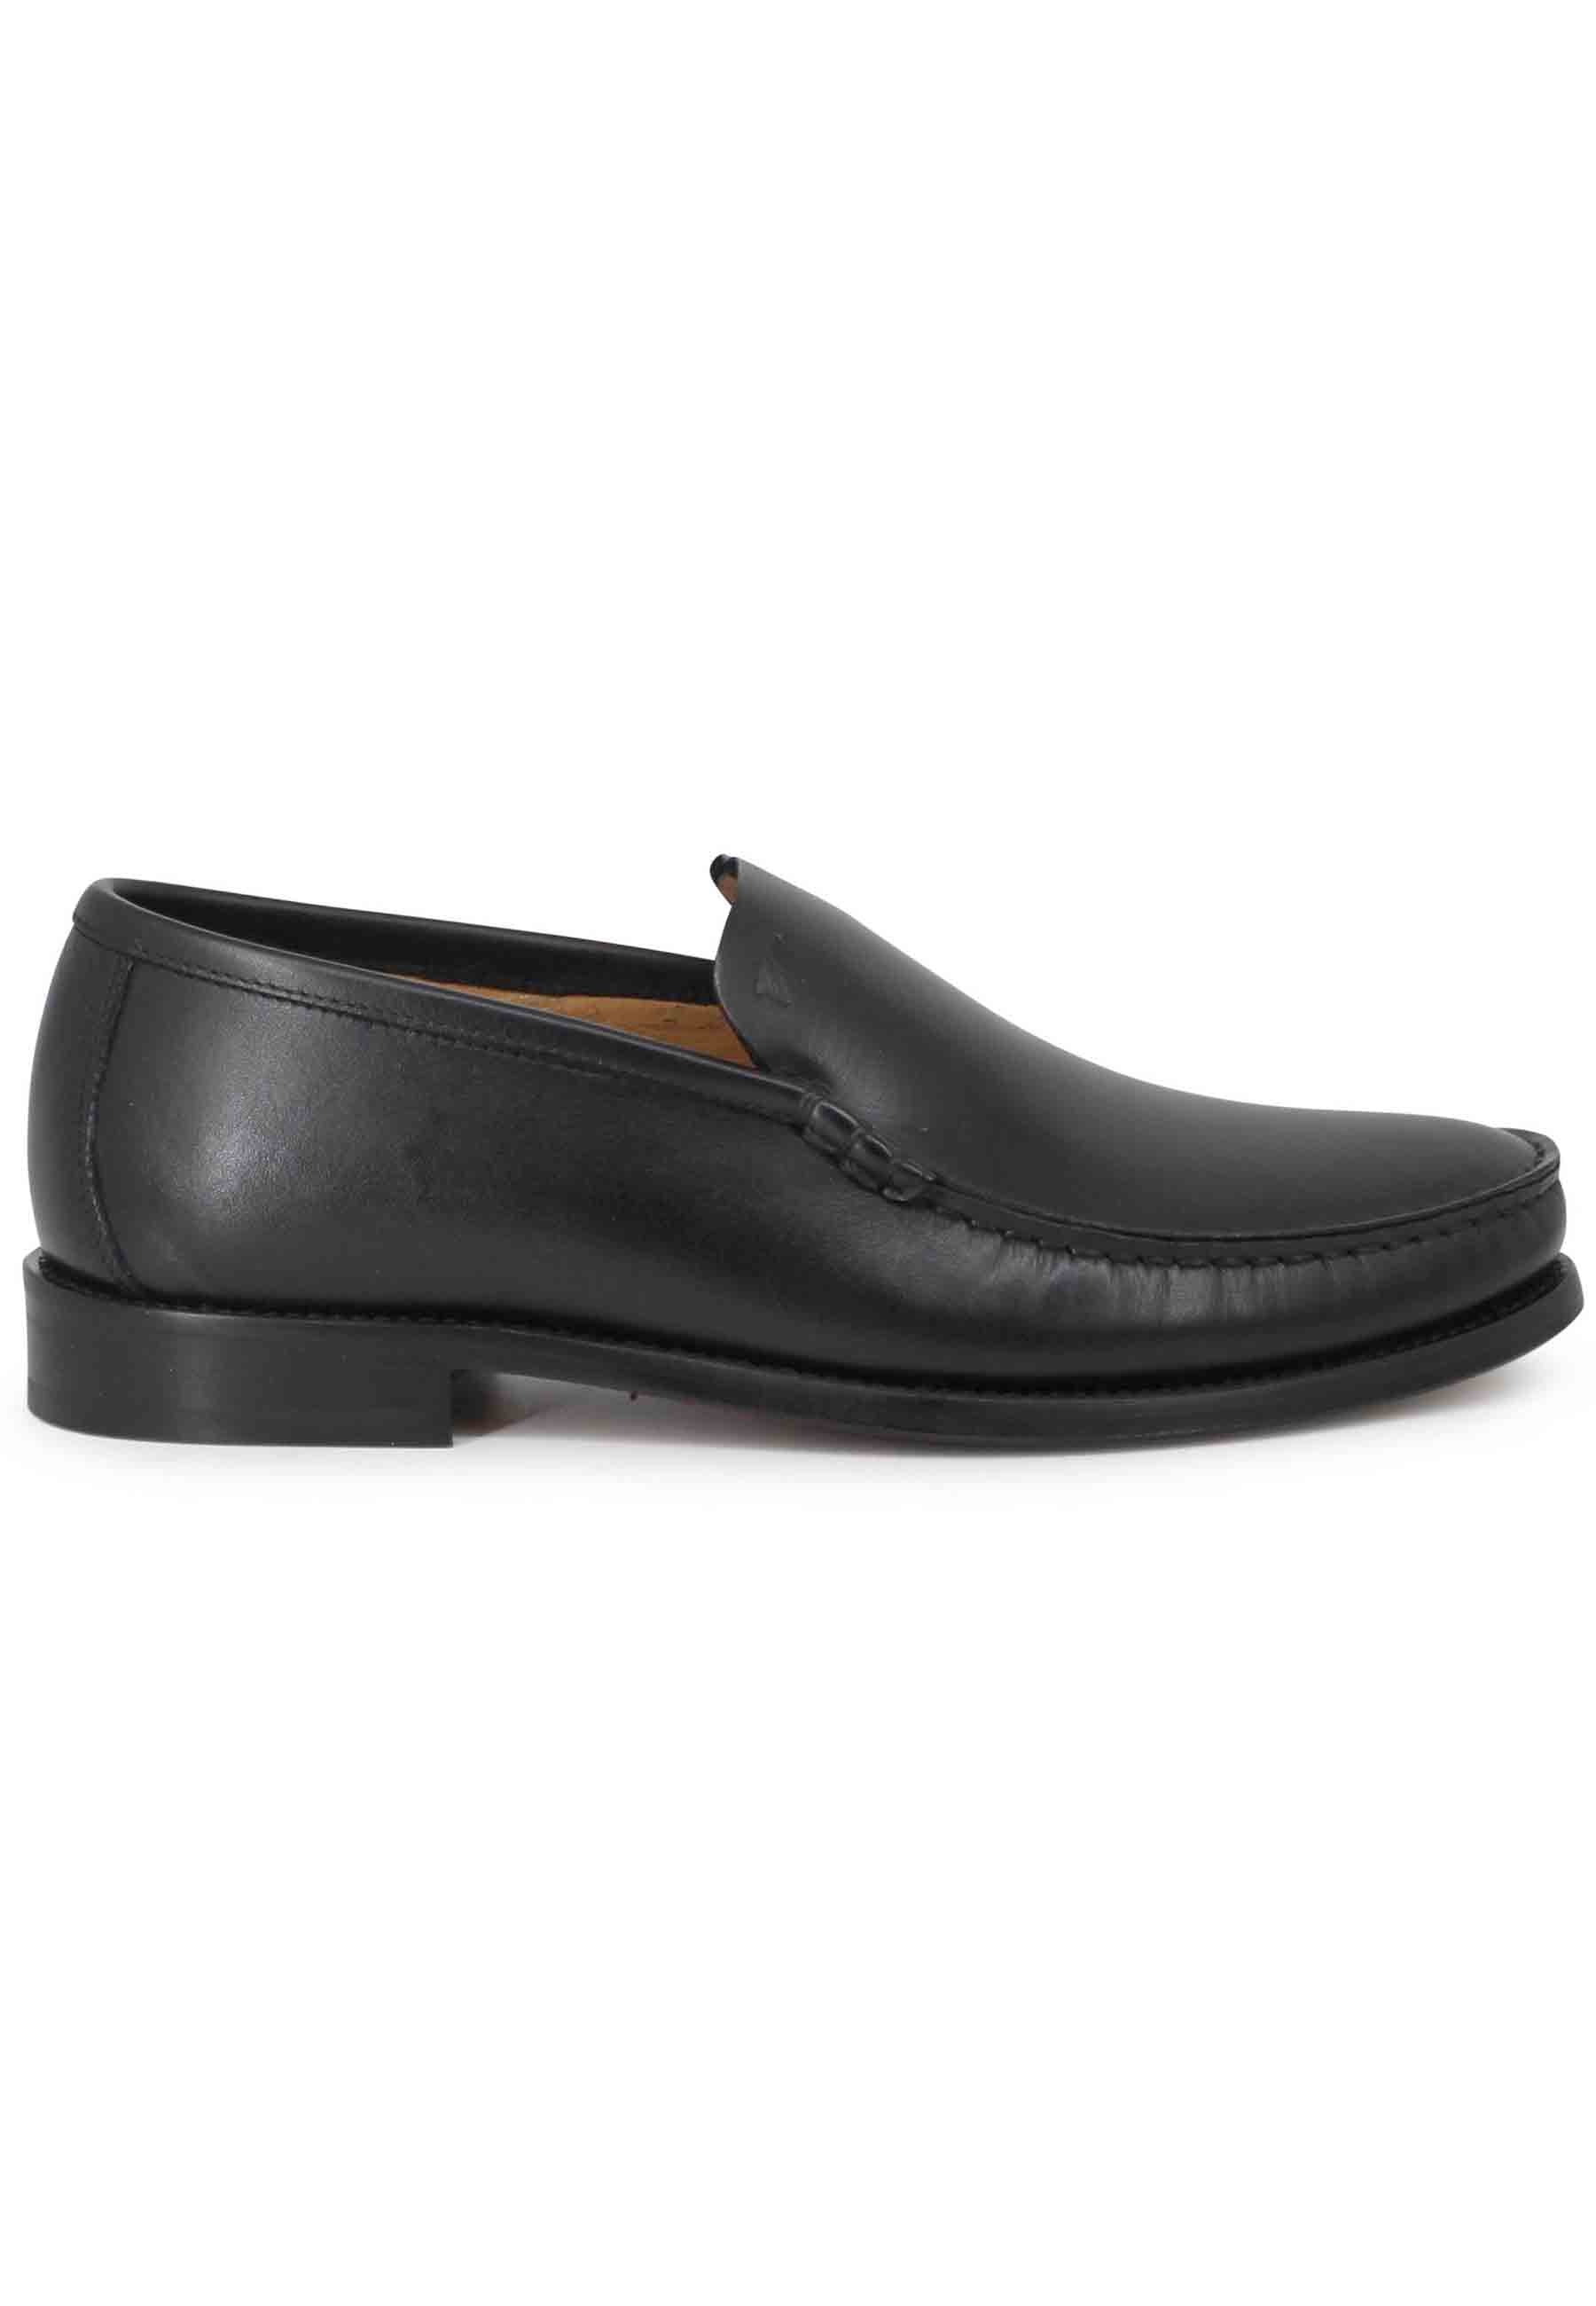 Men's black leather loafers with smooth flap and stitched leather sole